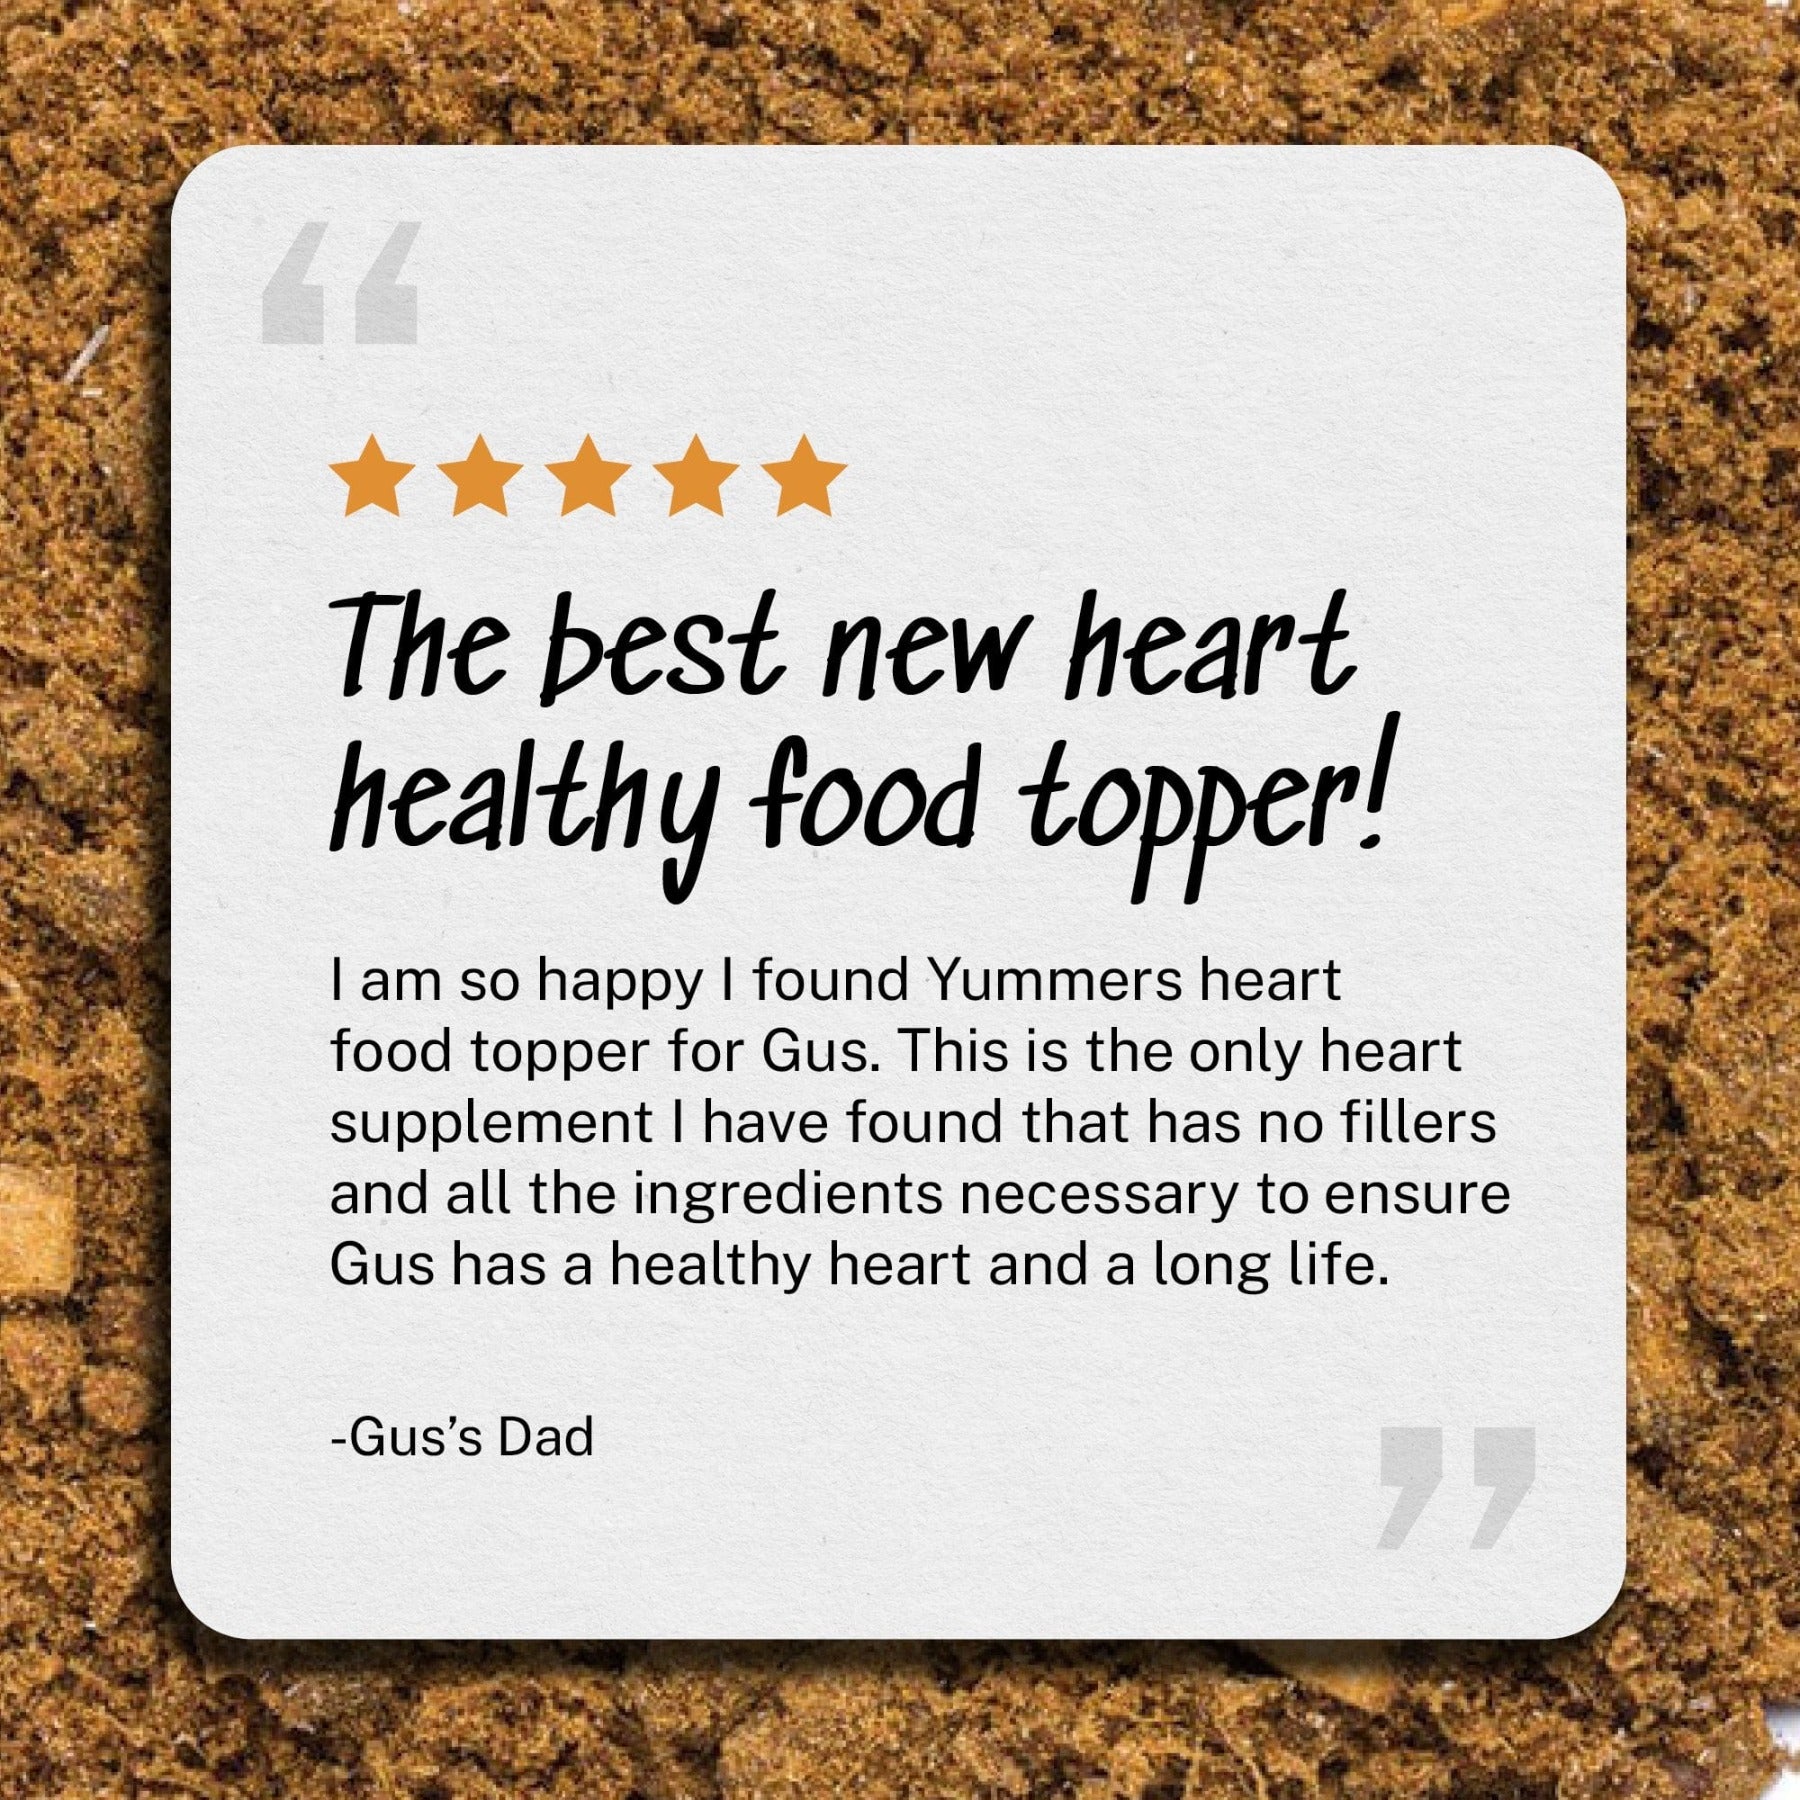 Review: The best new heart healthy food topper! - I am so happy I found Yummers heart food topper for Gus. This is the only heart supplement I have found that has no fillers and all the ingredients necessary to ensure Gus has a healthy heart and a long life. - Gus's dad